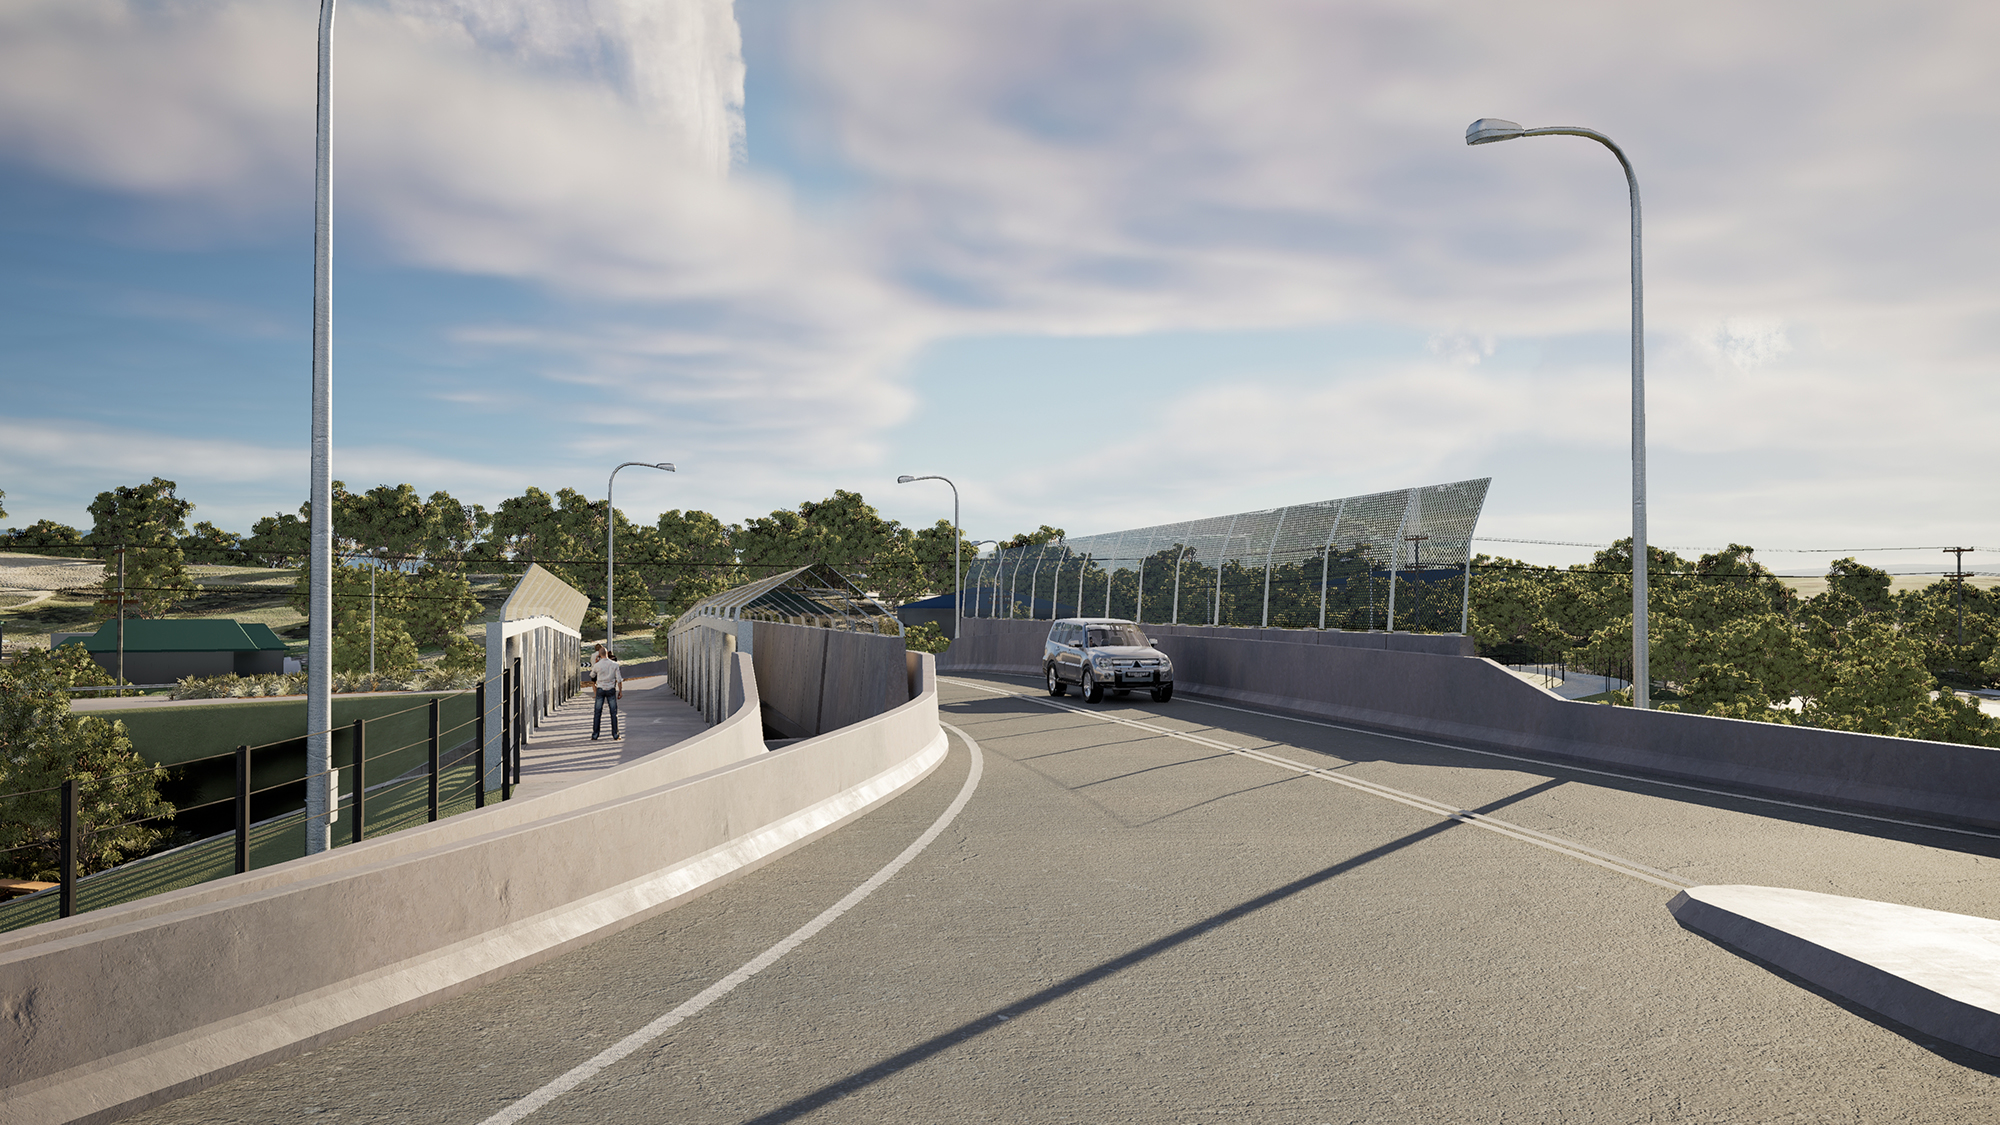 Visualisation of the dedicated shared-user path, improving safety for those crossing the bridge